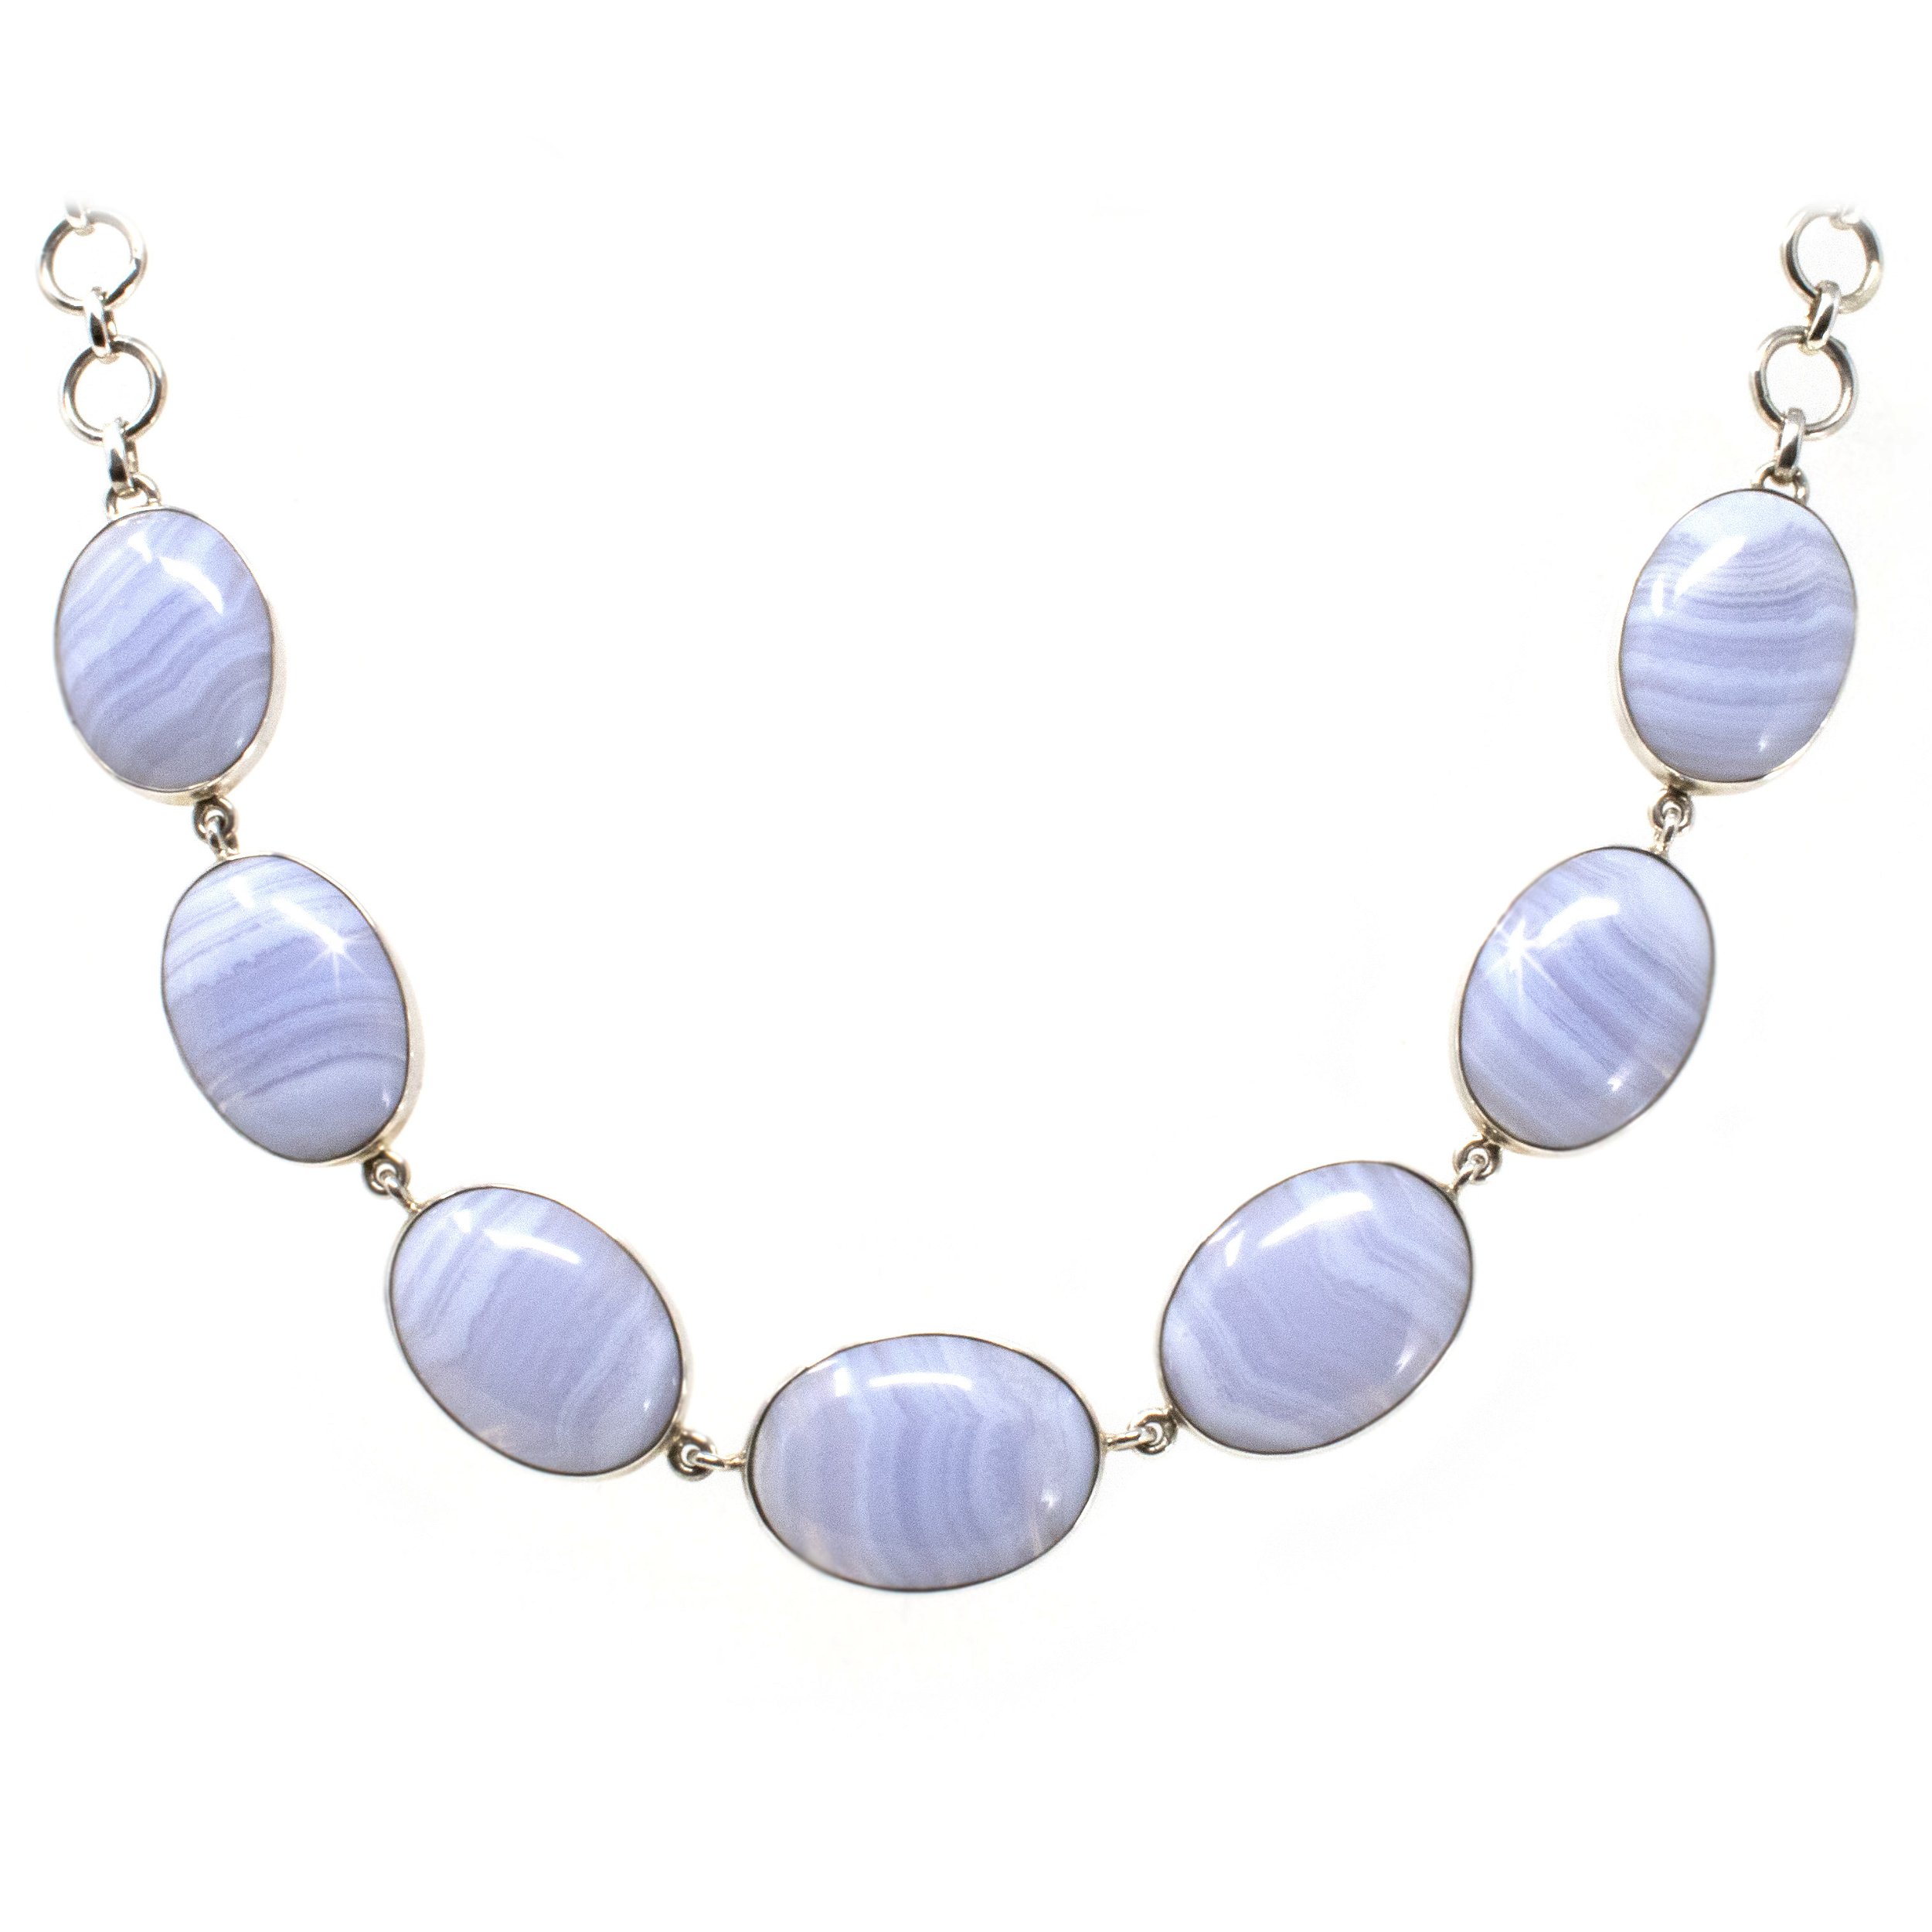 Blue Lace Necklace | Buy Online Blue Lace Agate Crystal Necklace -  Shubhanjali